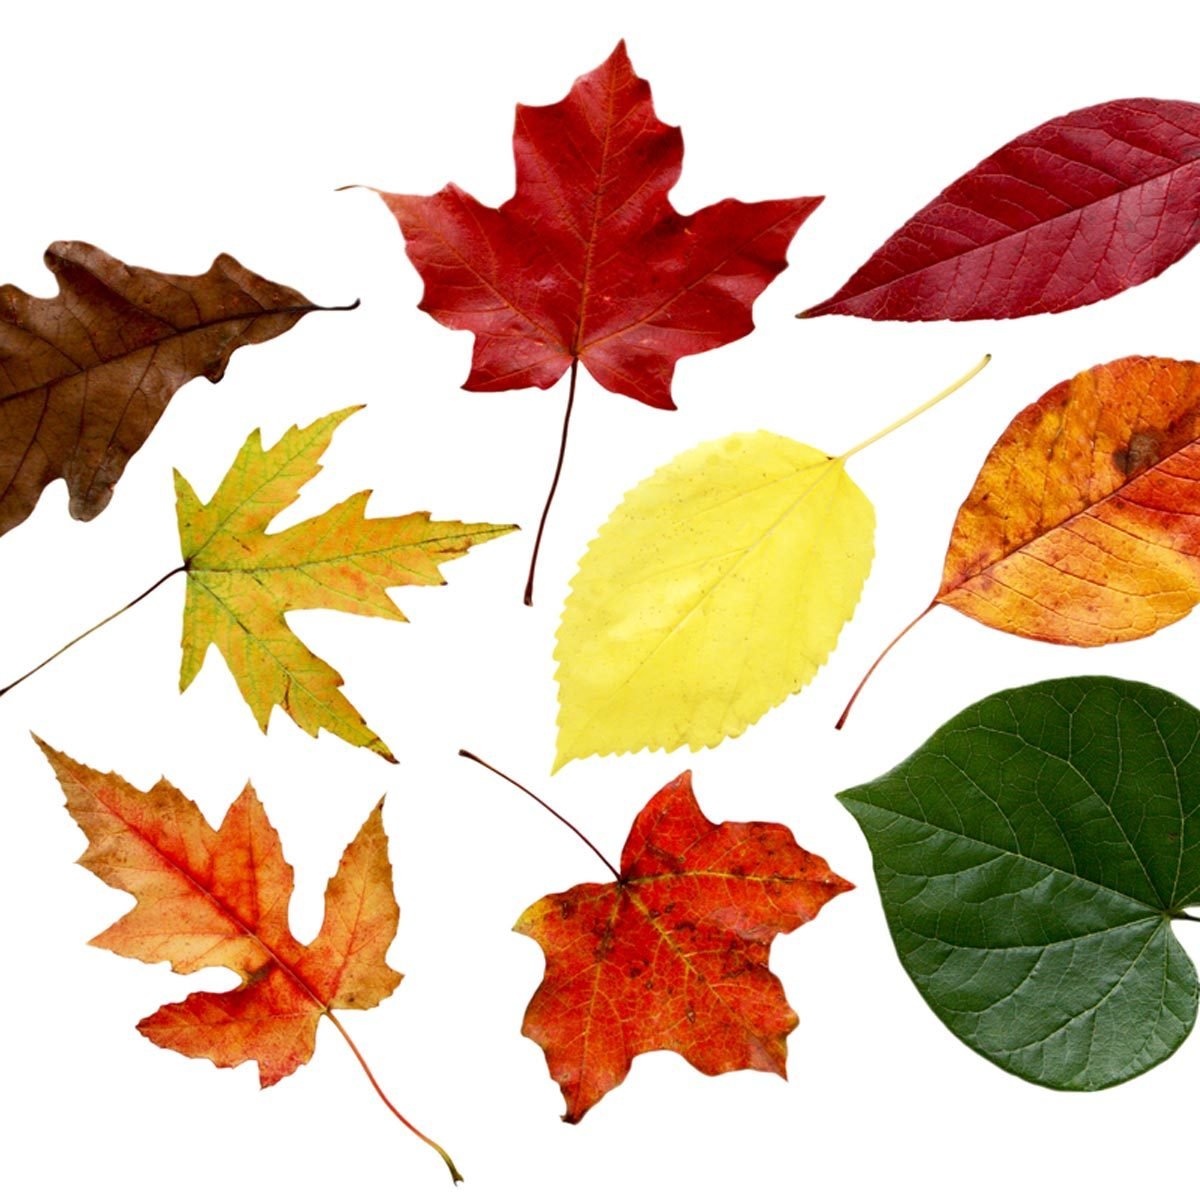 different types of tree leaves